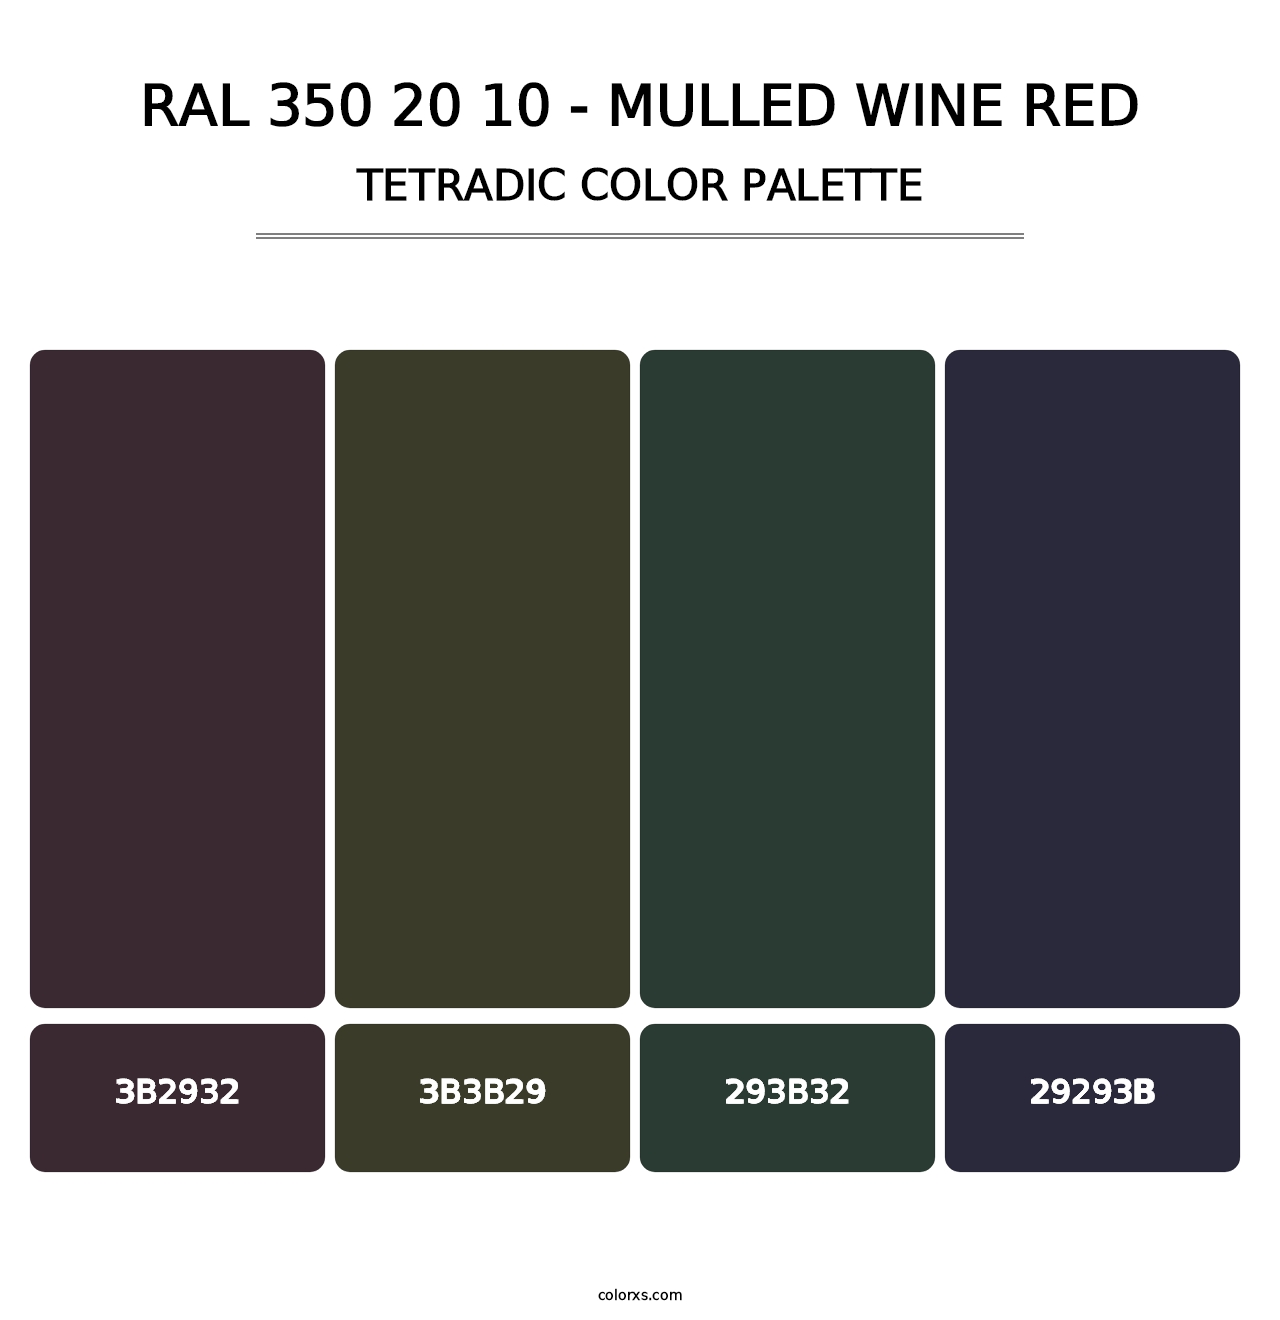 RAL 350 20 10 - Mulled Wine Red - Tetradic Color Palette